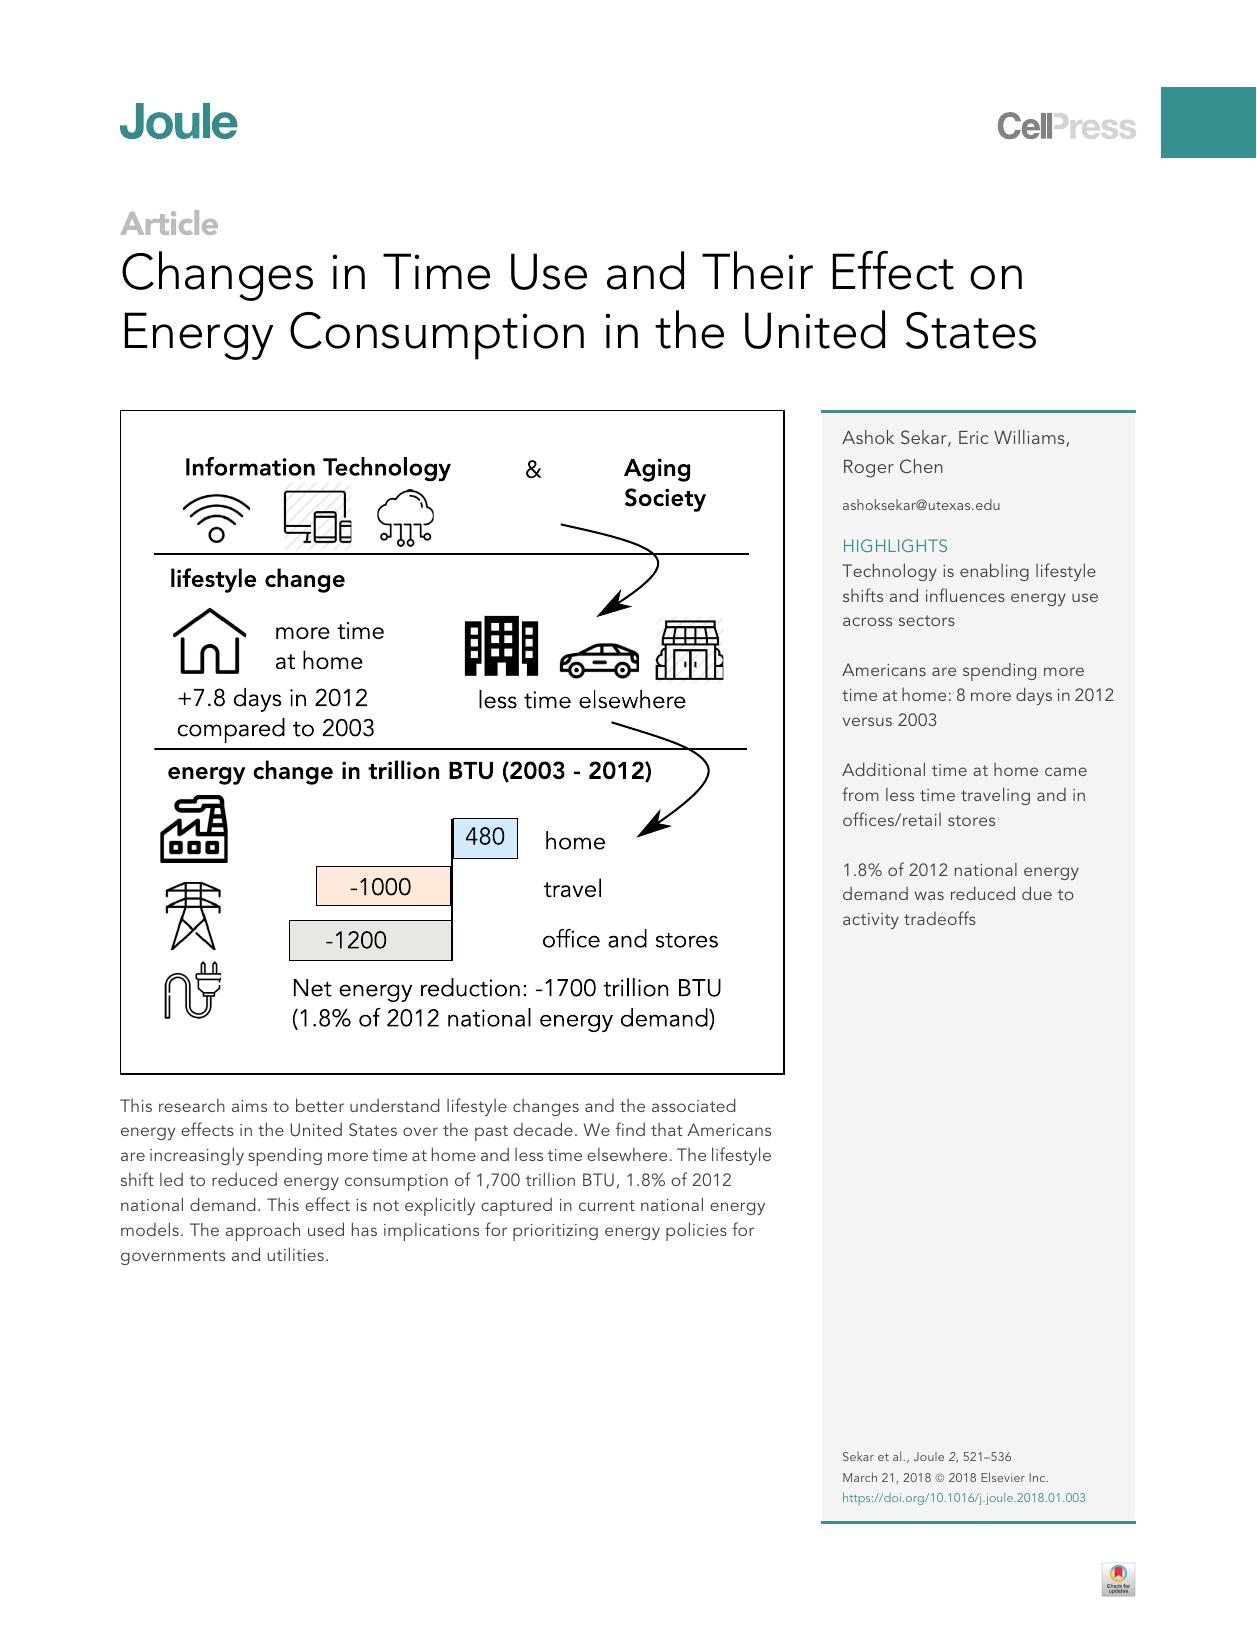 Changes in Time Use and Their Effect on Energy Consumption in the United States by Ashok Sekar & Eric Williams & Roger Chen